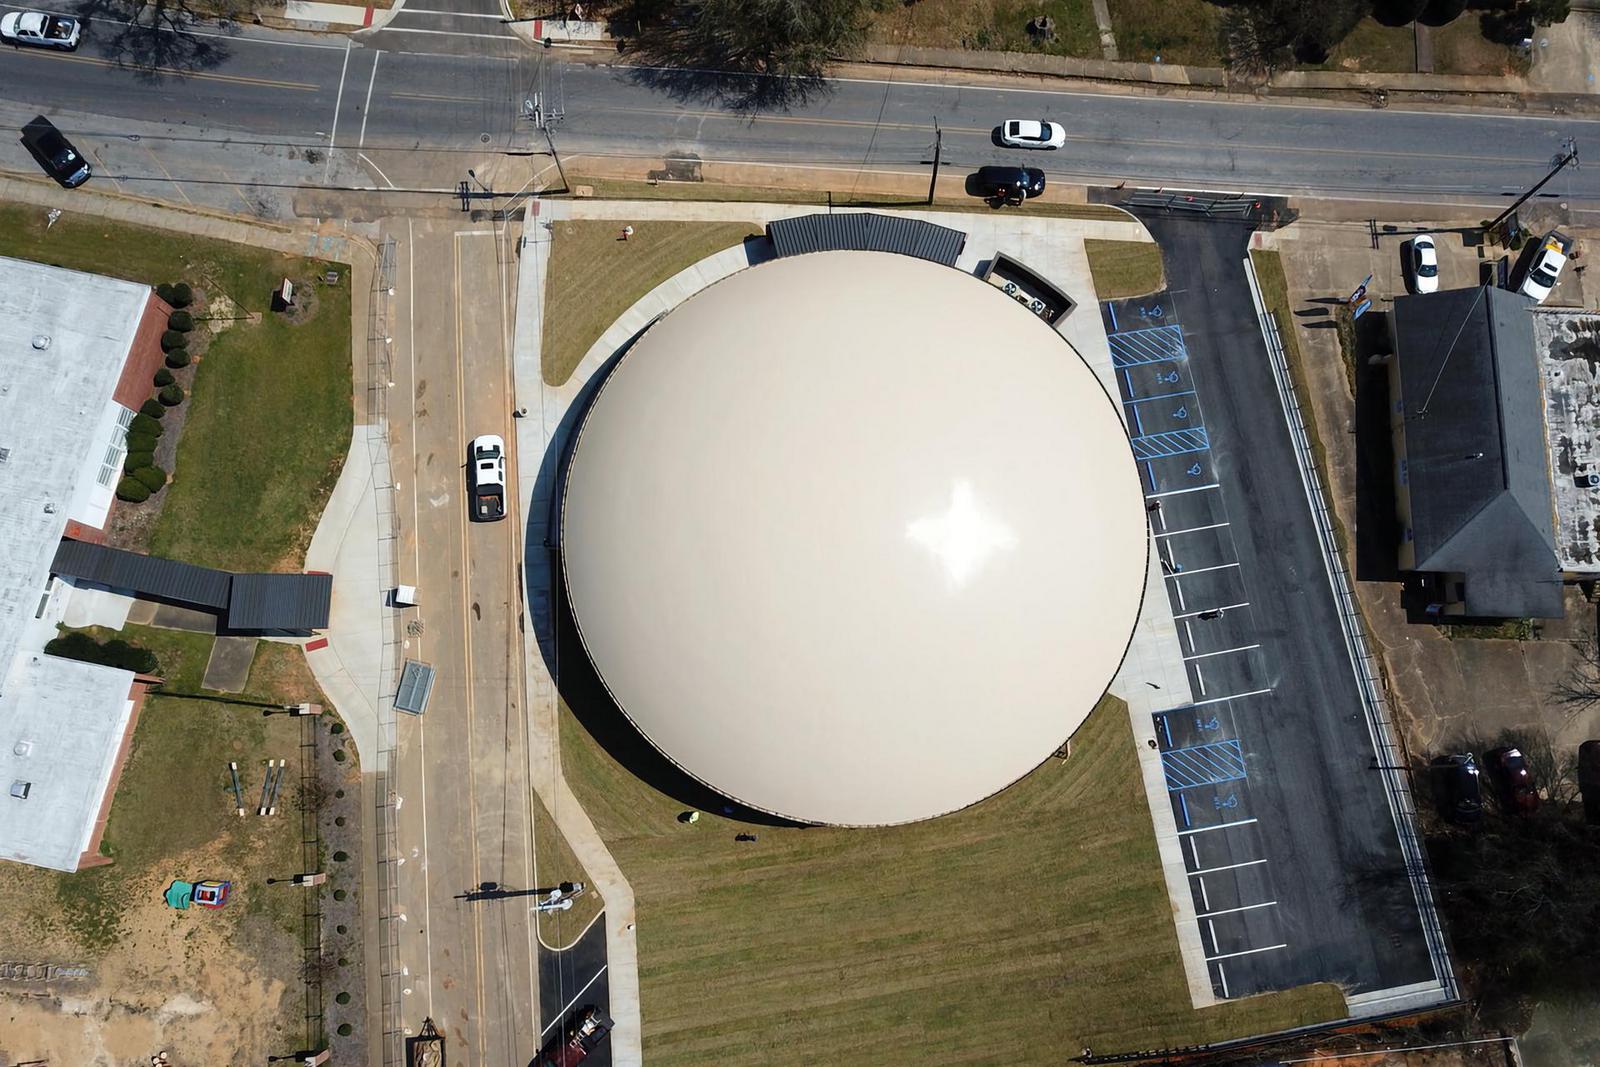 Overhead view of the dome.